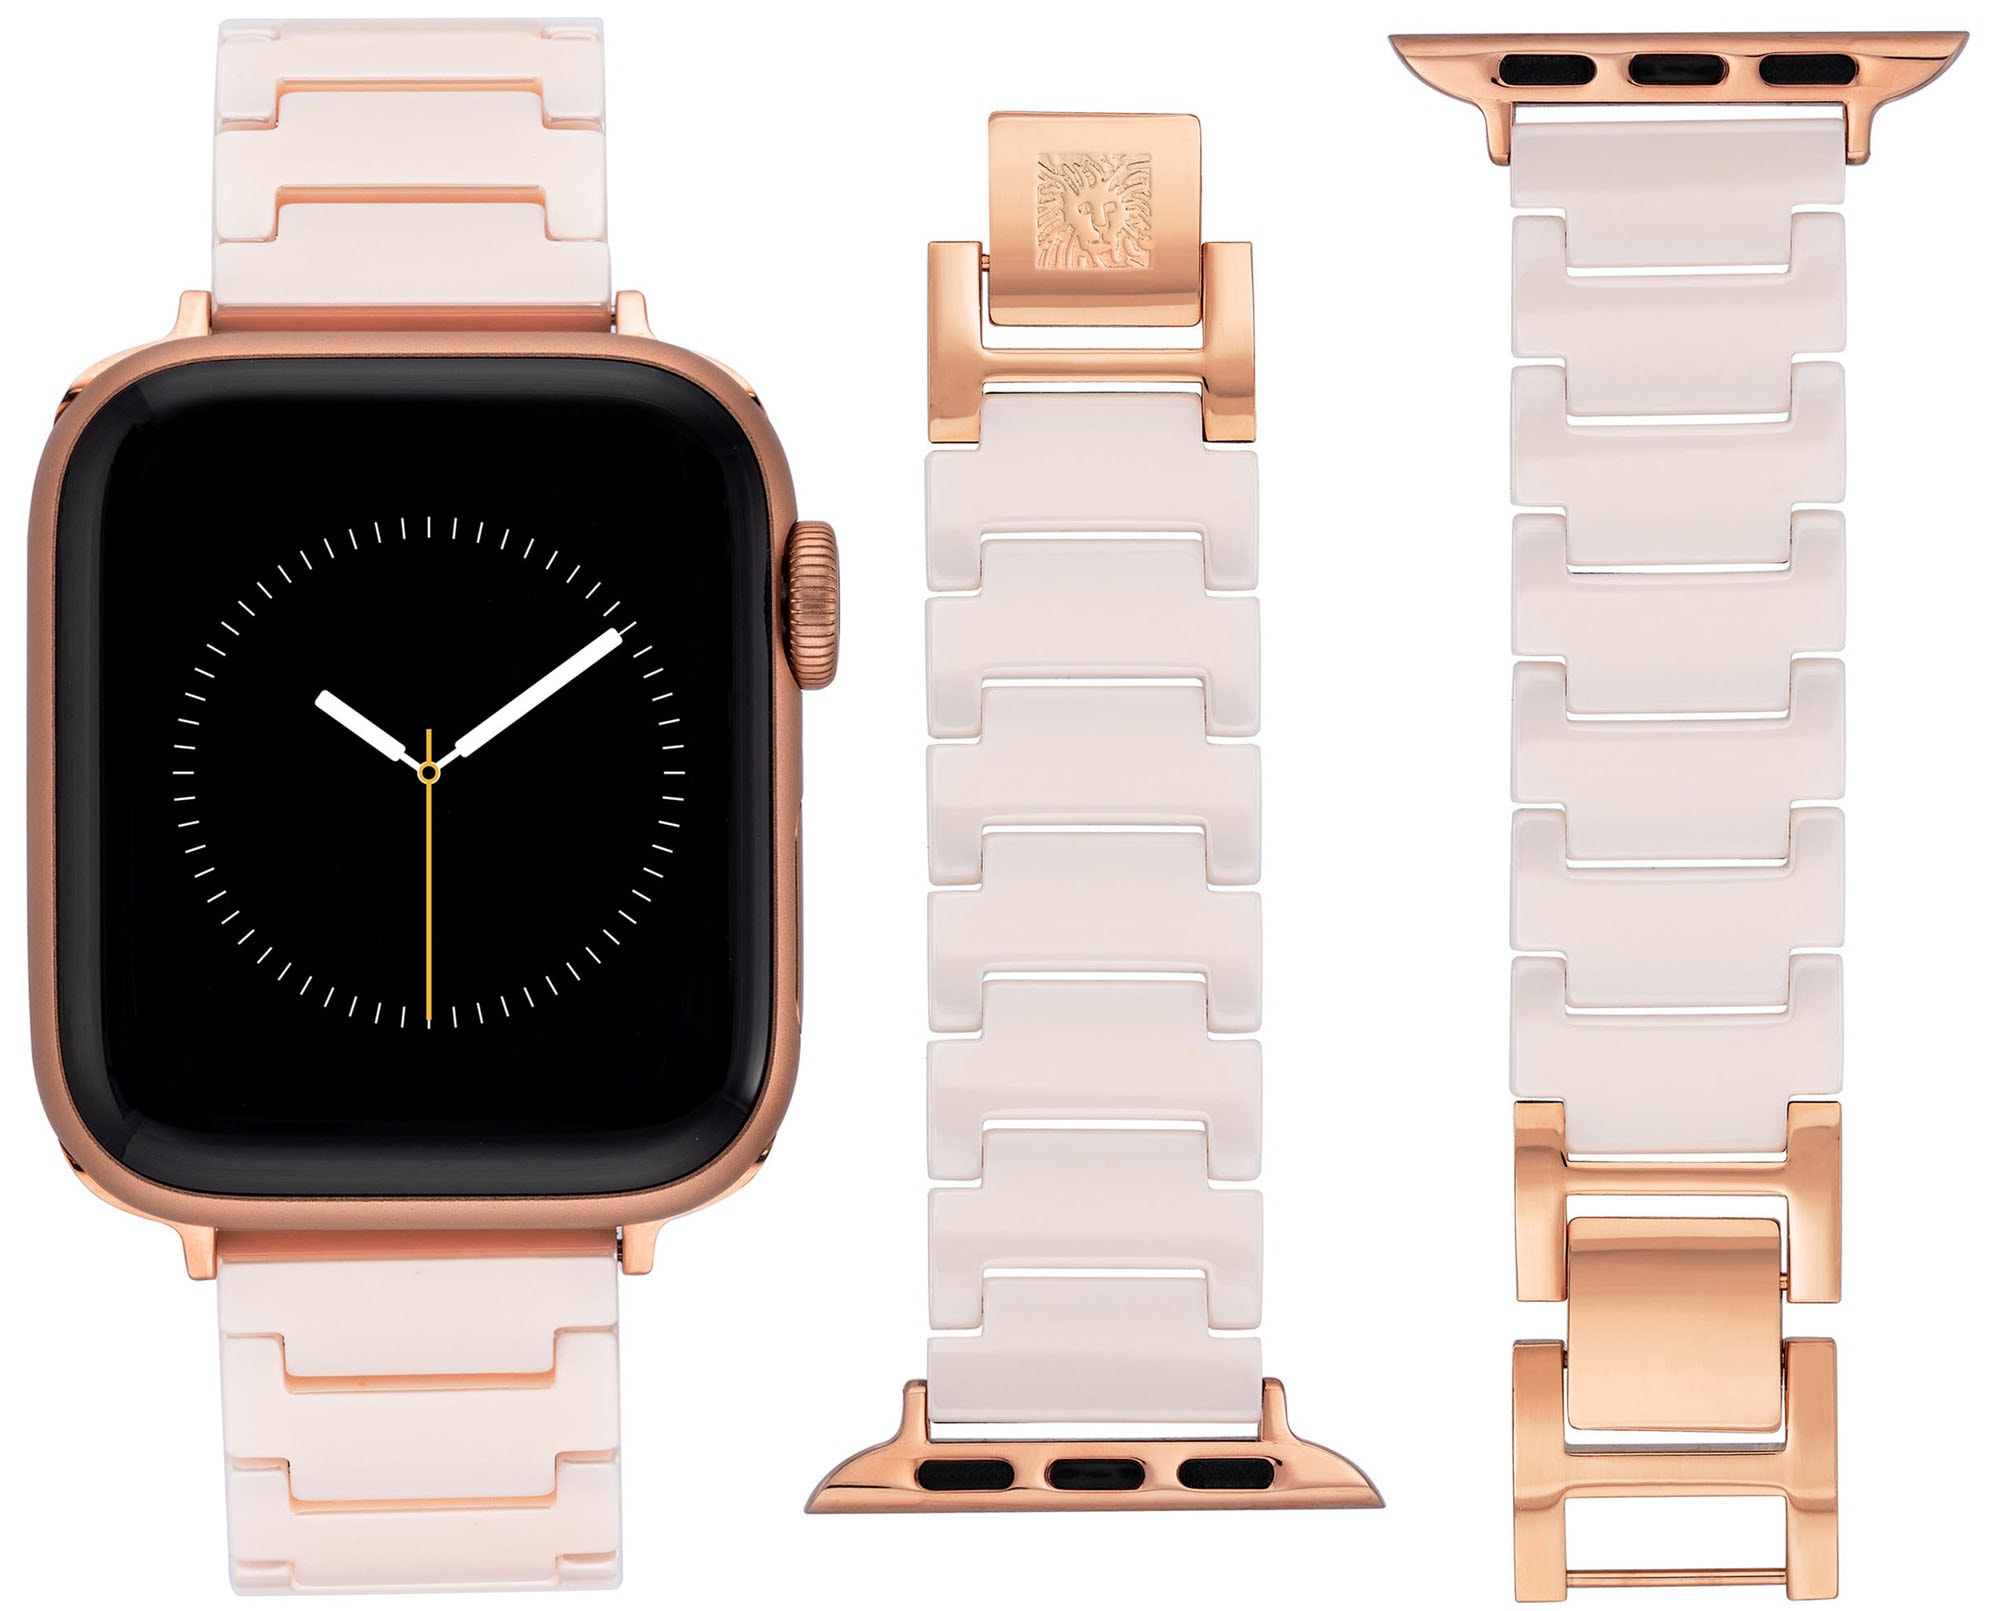 Anne Klein's Apple Watch band is crafted from smooth ceramic links liquid-shine stainless steel, offering a sleek finish